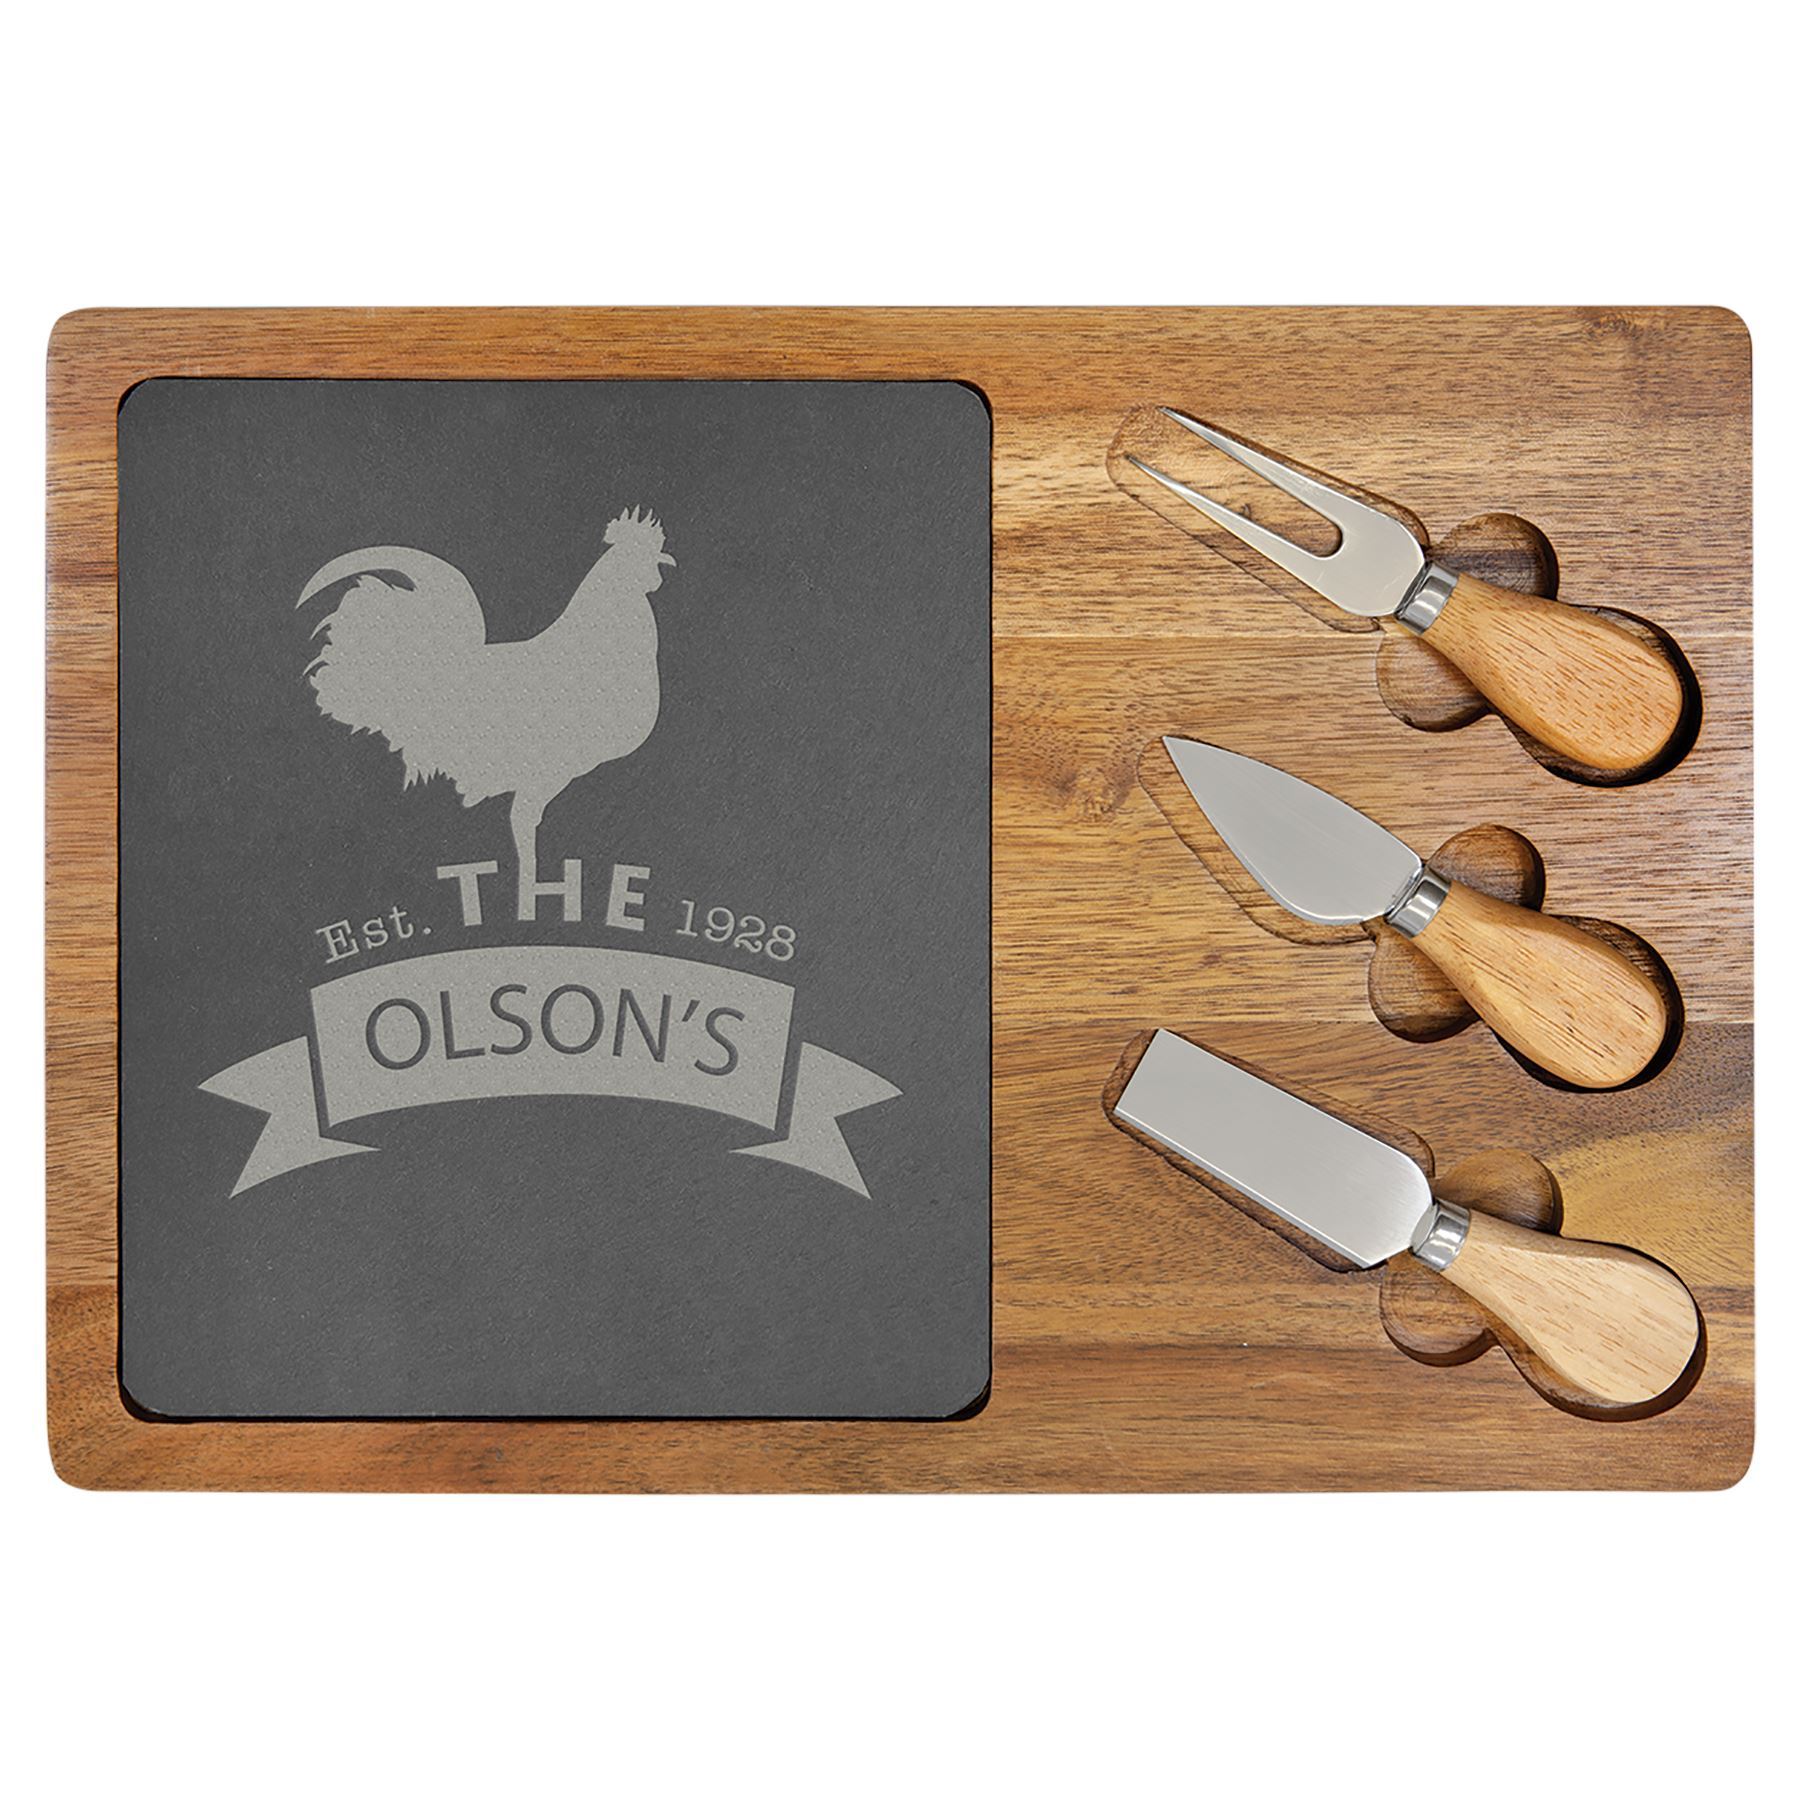 Acacia Wood/Slate Rectangle Cheese Set with Three Tools, 13 3/4" x 9 3/4", Laser Engraved Cutting/Serving Board Craftworks NW 